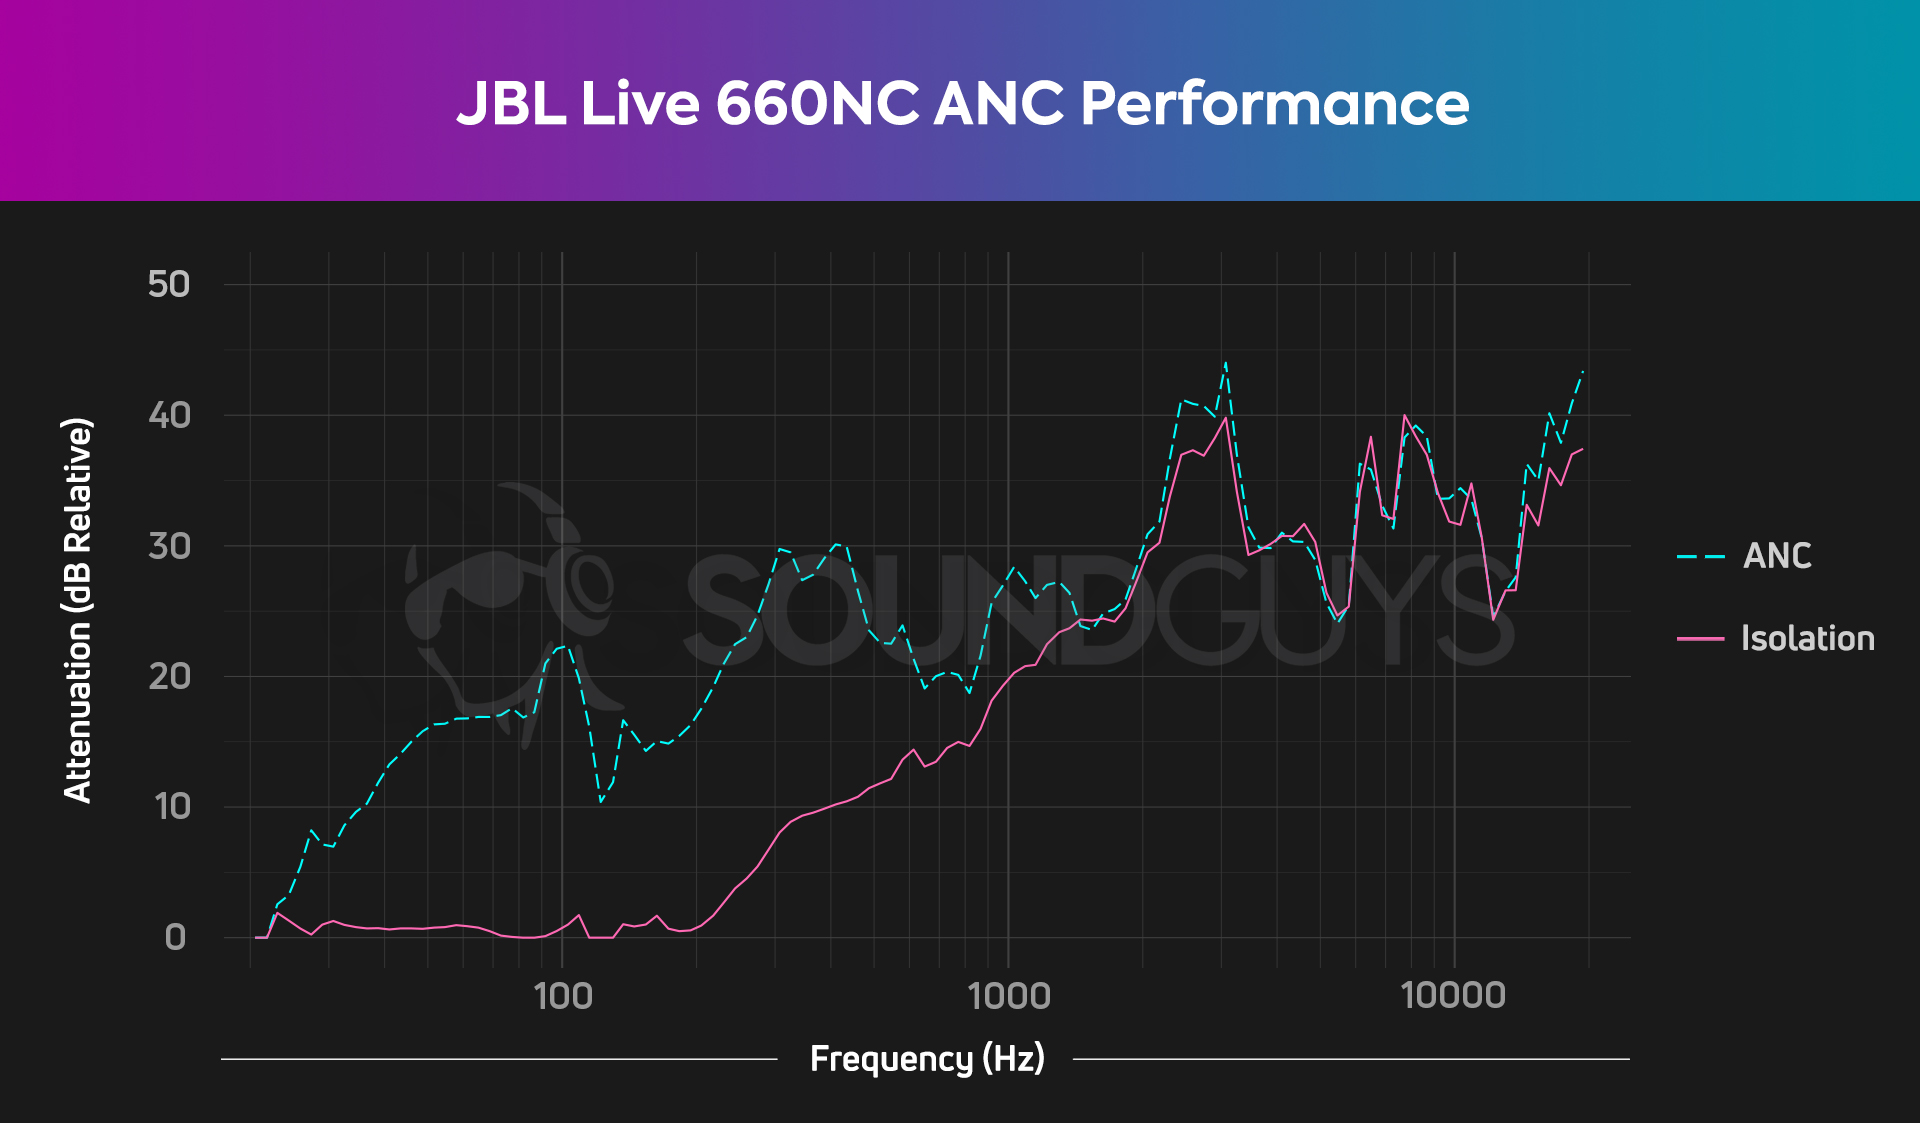 An ANC chart for the JBL Live 660NC, showing decent low end attenuation.